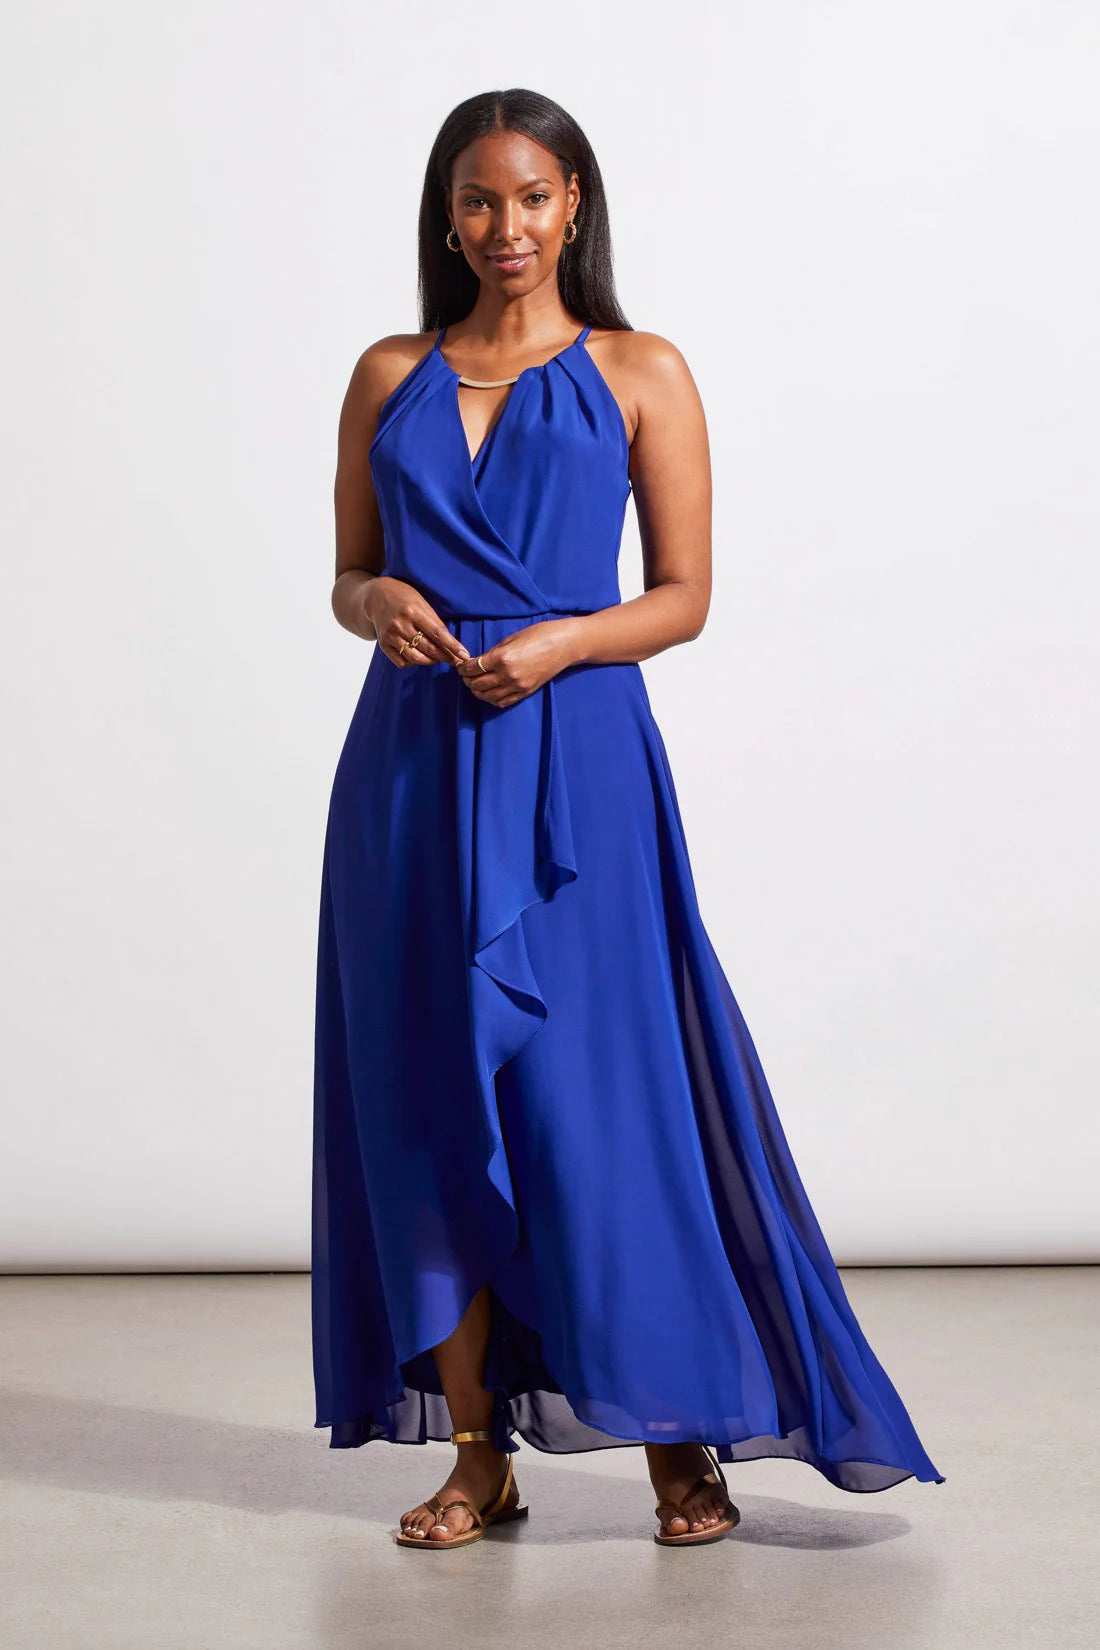  Cut from floaty chiffon fabric, this maxi dress will leave you feeling light as a cloud. We can't get enough of the keyhole neckline that transitions into a surplice bodice, the solid color, sleeveless construction, lined interior, and floor-length silhouette.